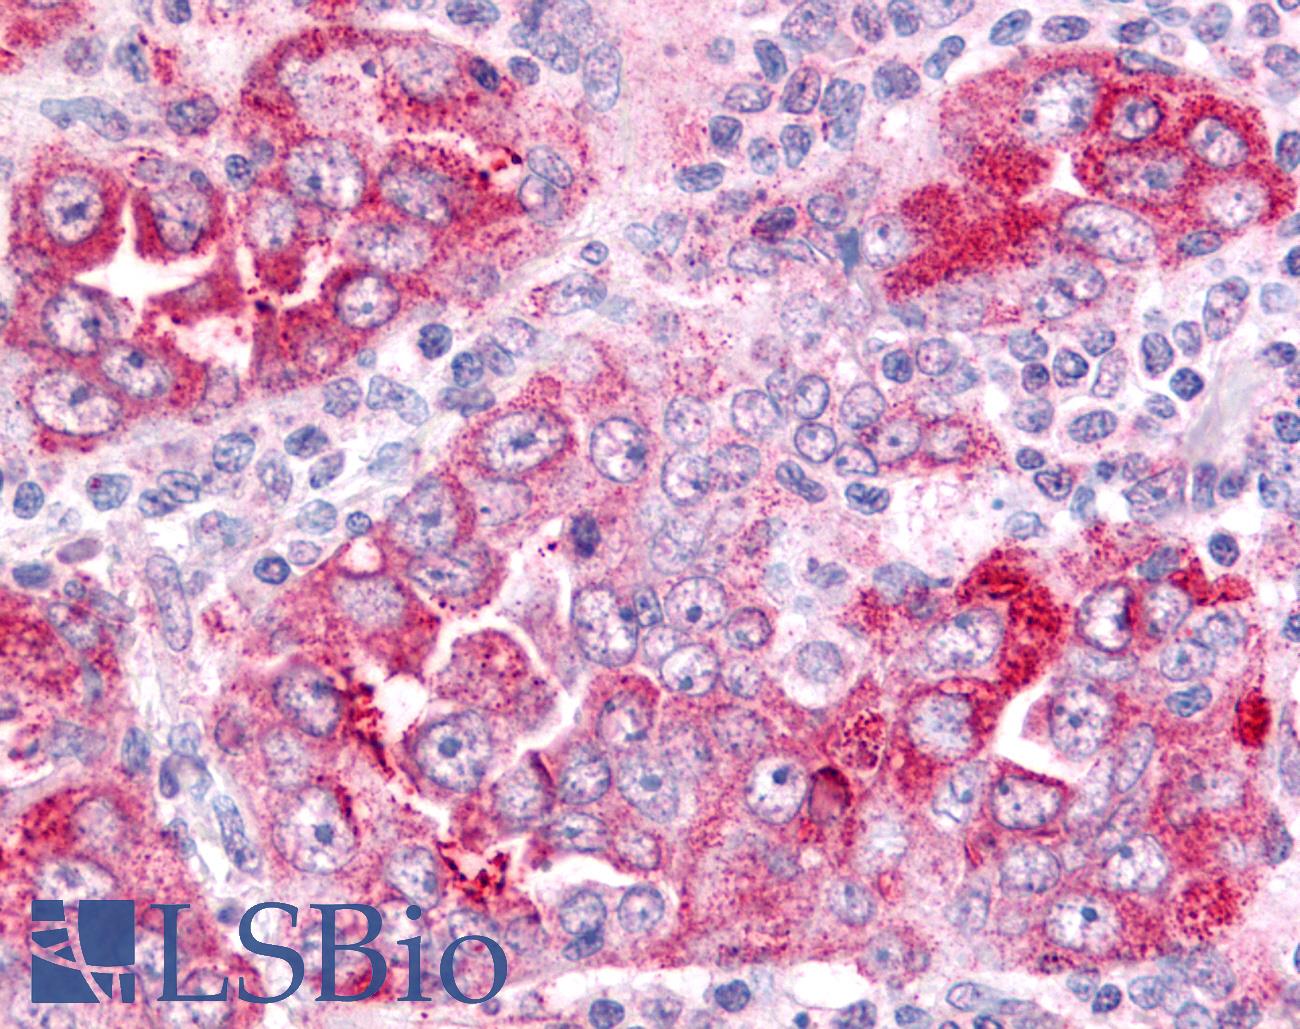 PGES / PTGES Antibody - Anti-PGES / PTGES antibody IHC of human Lung, Non-Small Cell Carcinoma. Immunohistochemistry of formalin-fixed, paraffin-embedded tissue after heat-induced antigen retrieval.